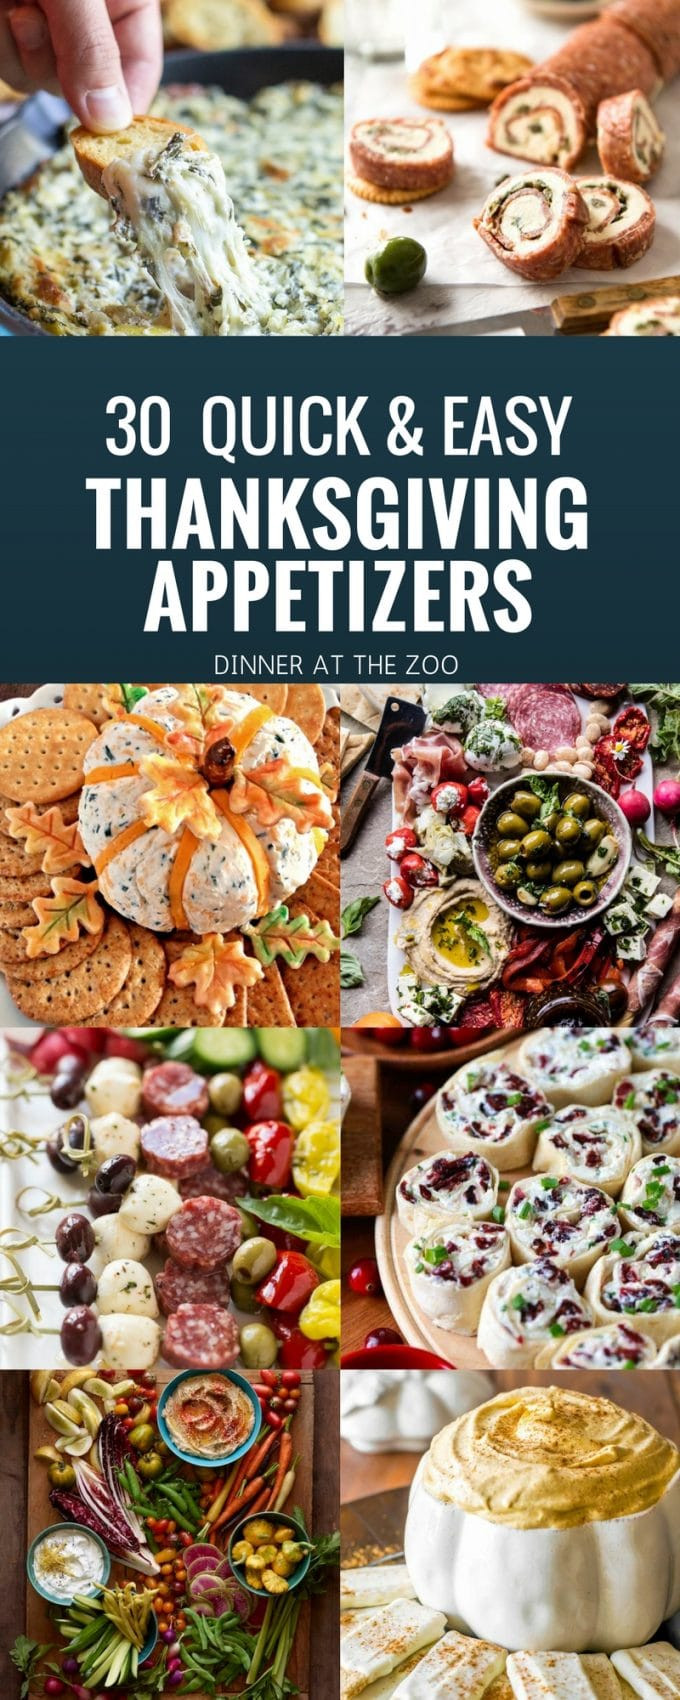 Simple Thanksgiving Appetizers
 30 Thanksgiving Appetizer Recipes Dinner at the Zoo